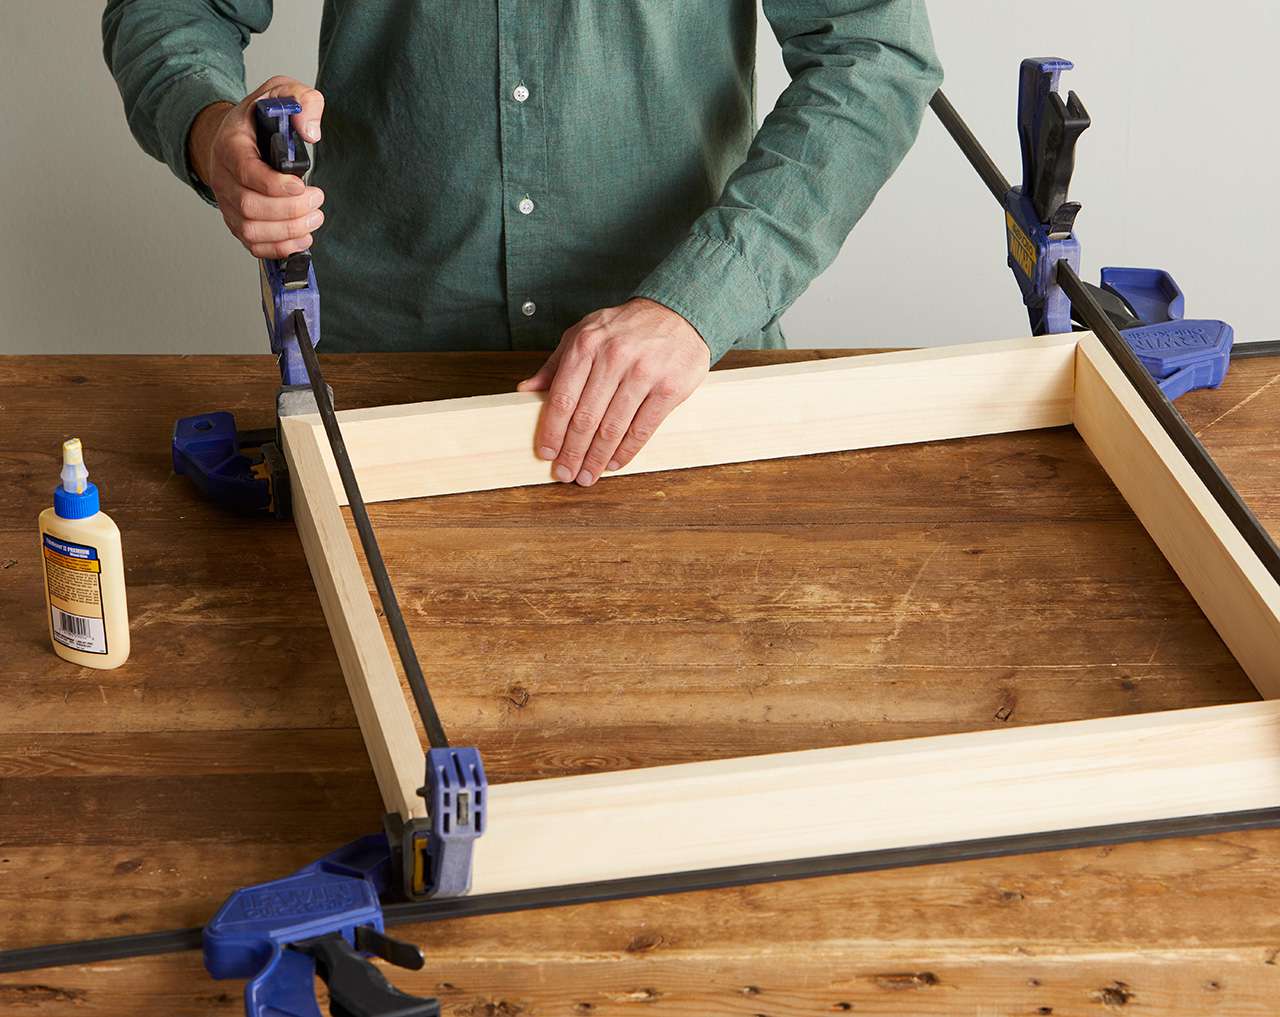 wood glue and clamps holding together canvas frame